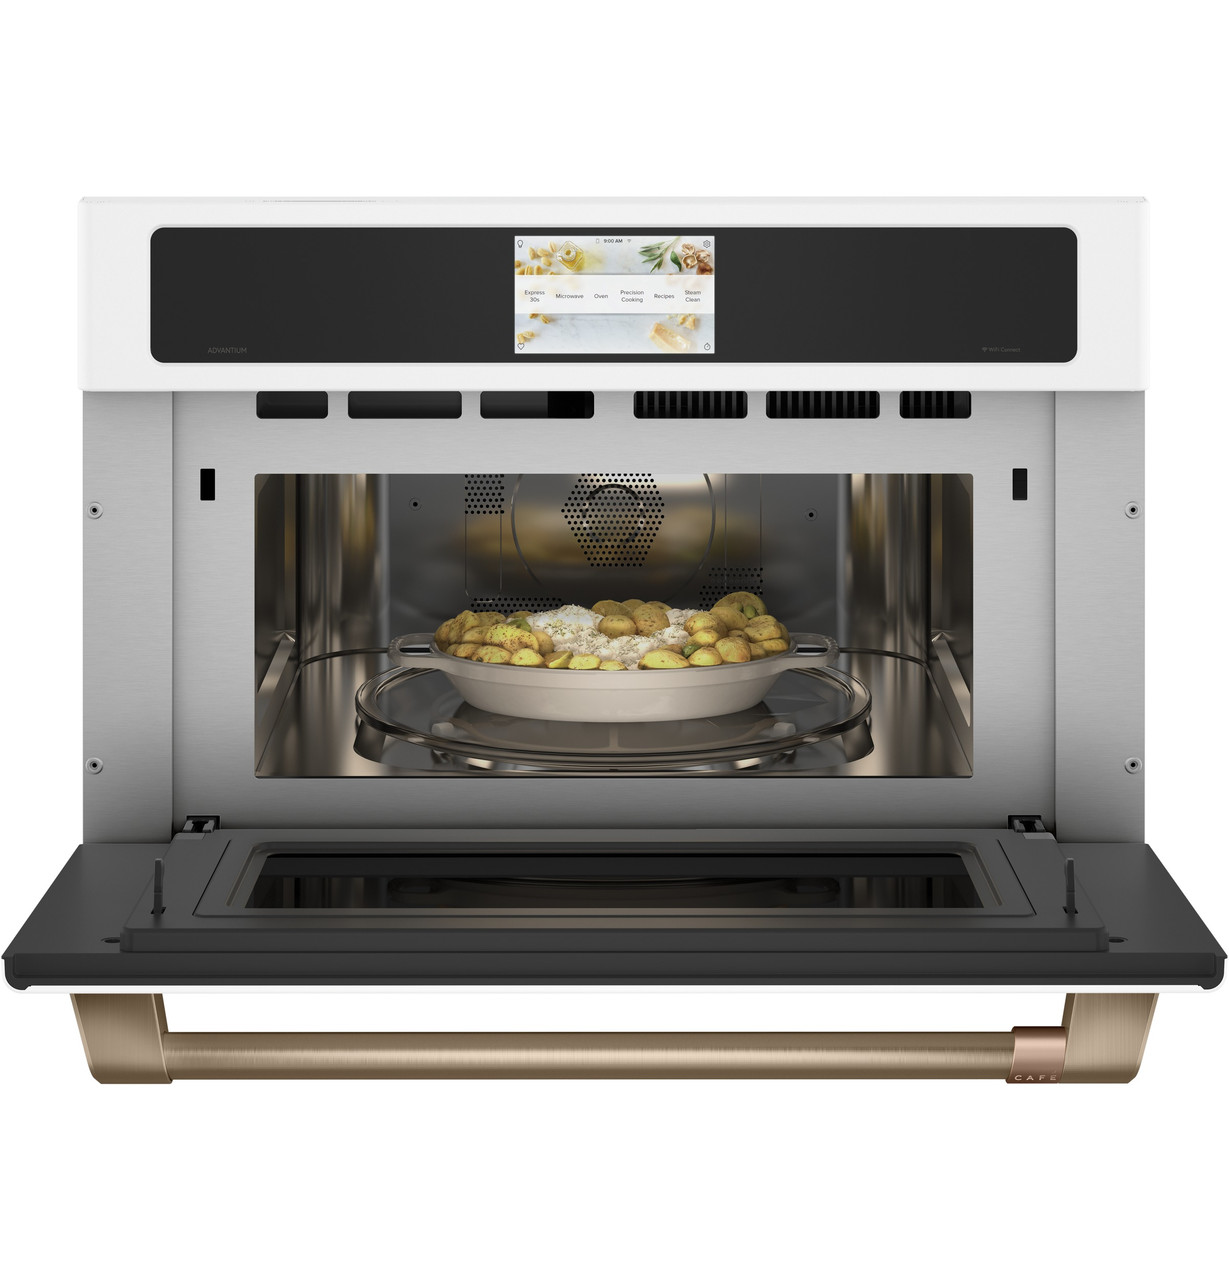 What is a smart oven and do I need one?